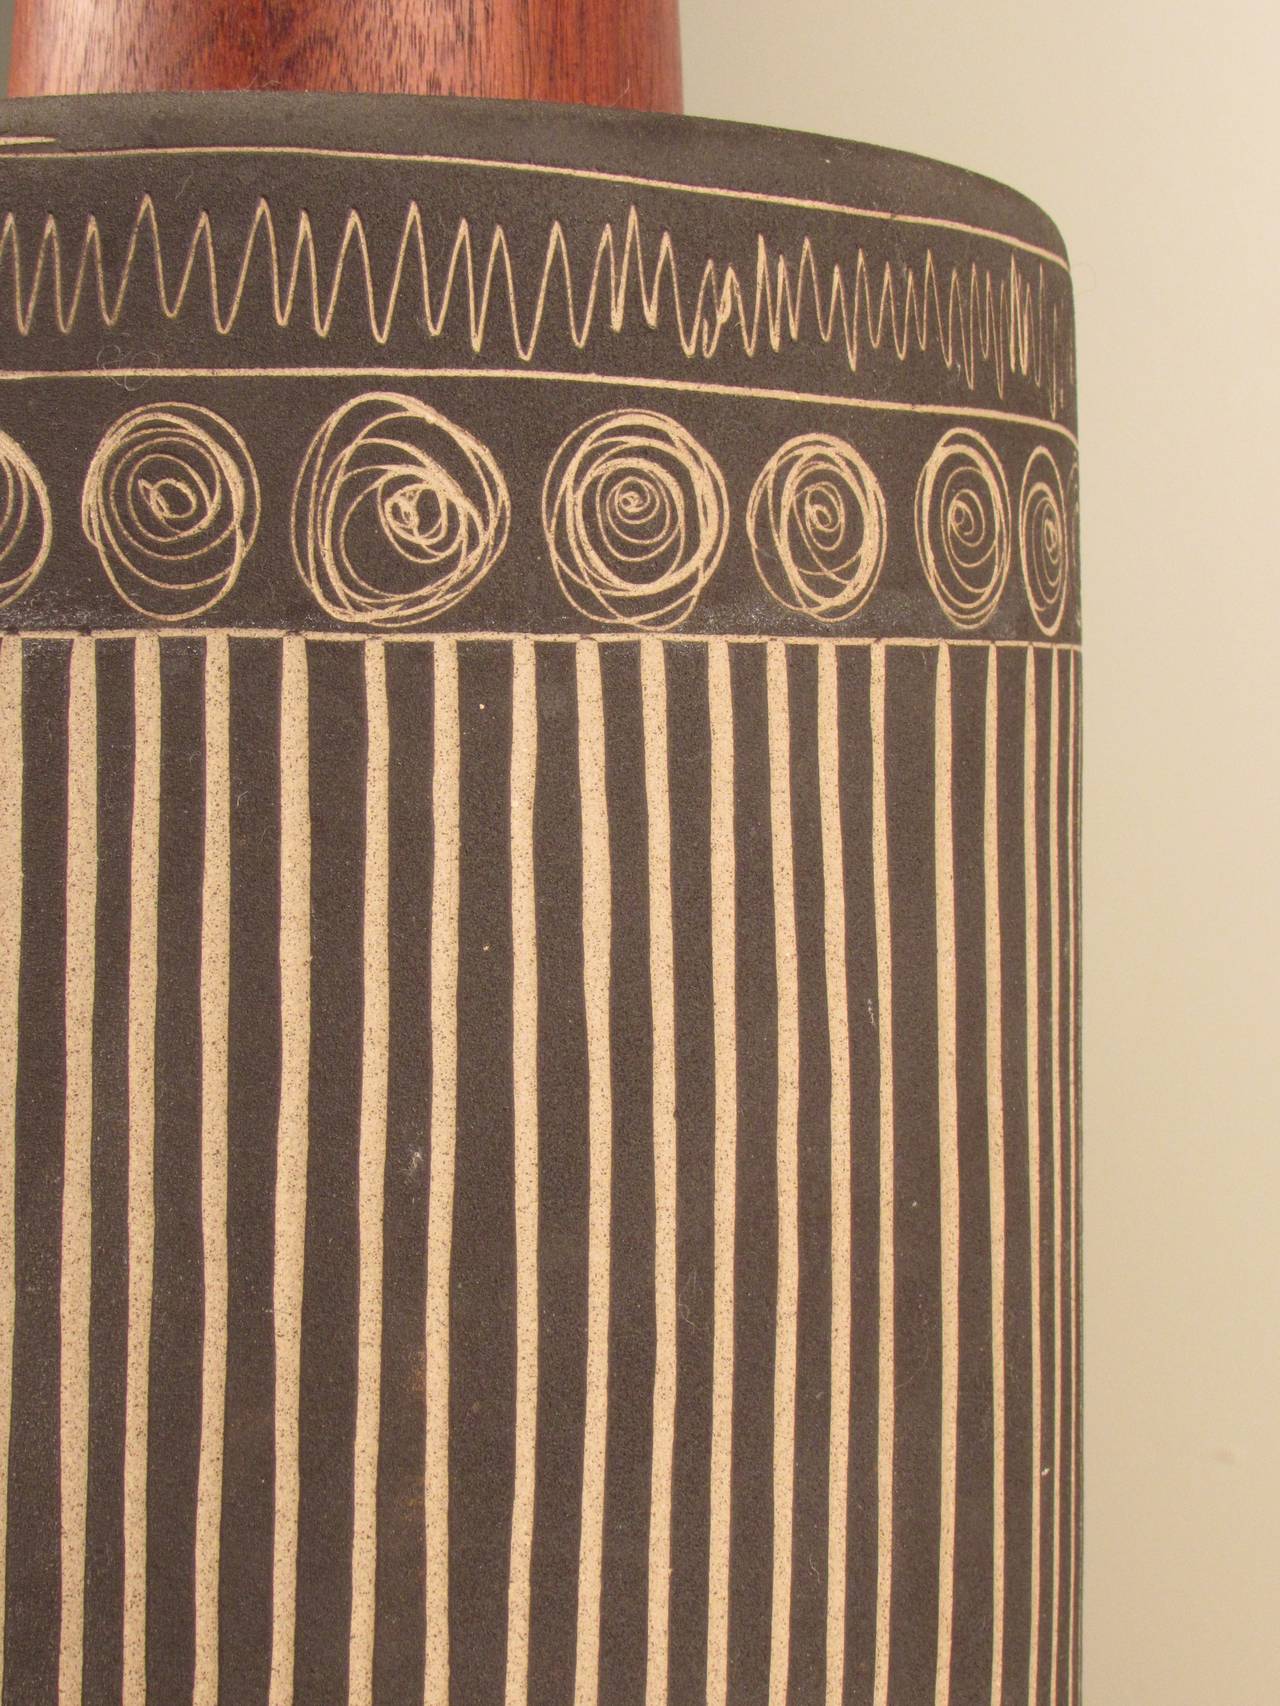 Incomparable Gordon + Jane Martz Lamp with Incised Decoration 1